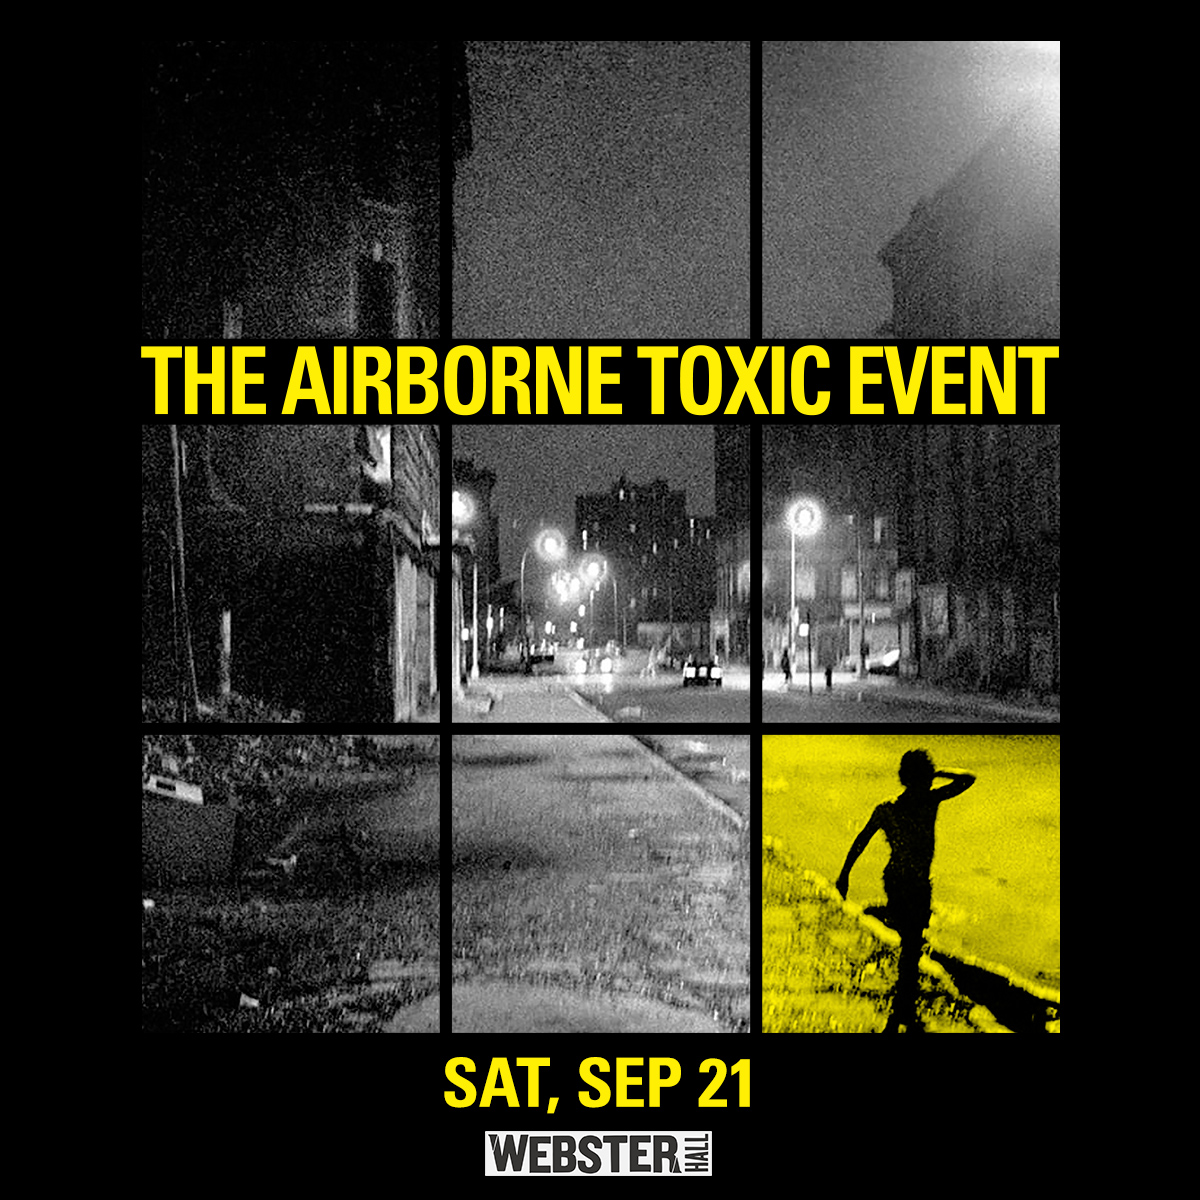 JUST ANNOUNCED: The Airborne Toxic Event will be here sat, sep 21 🤘 tickets go on sale friday at 10am